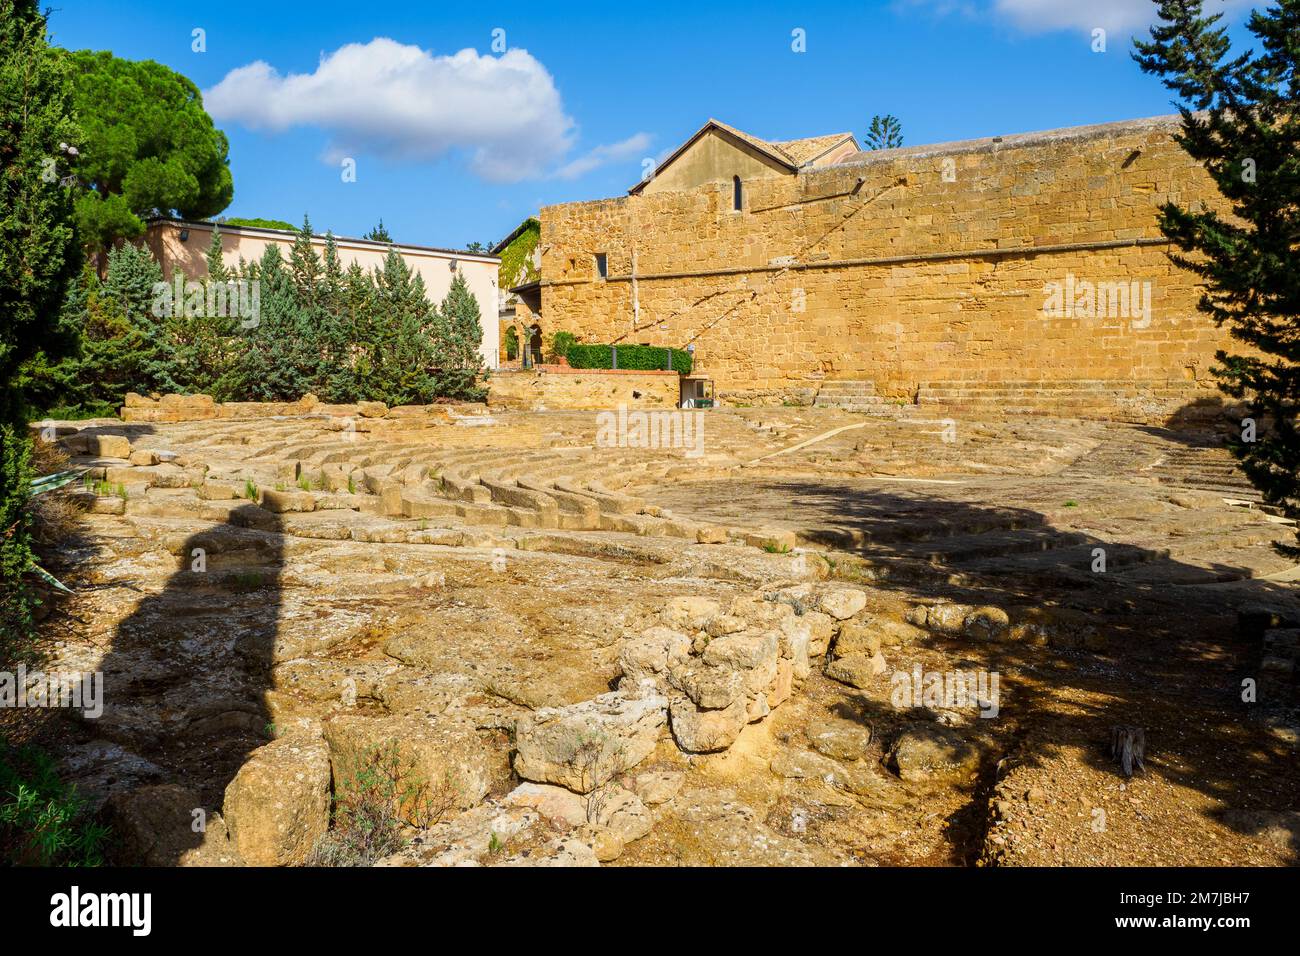 Ekklesiasterion and Oratorium of Phalaris. The Ekklesiasterion was the building in which the meeting of the ekklesia (the people assembly) were house and it was close to the sacred complex of the Chthonic deities. Stock Photo